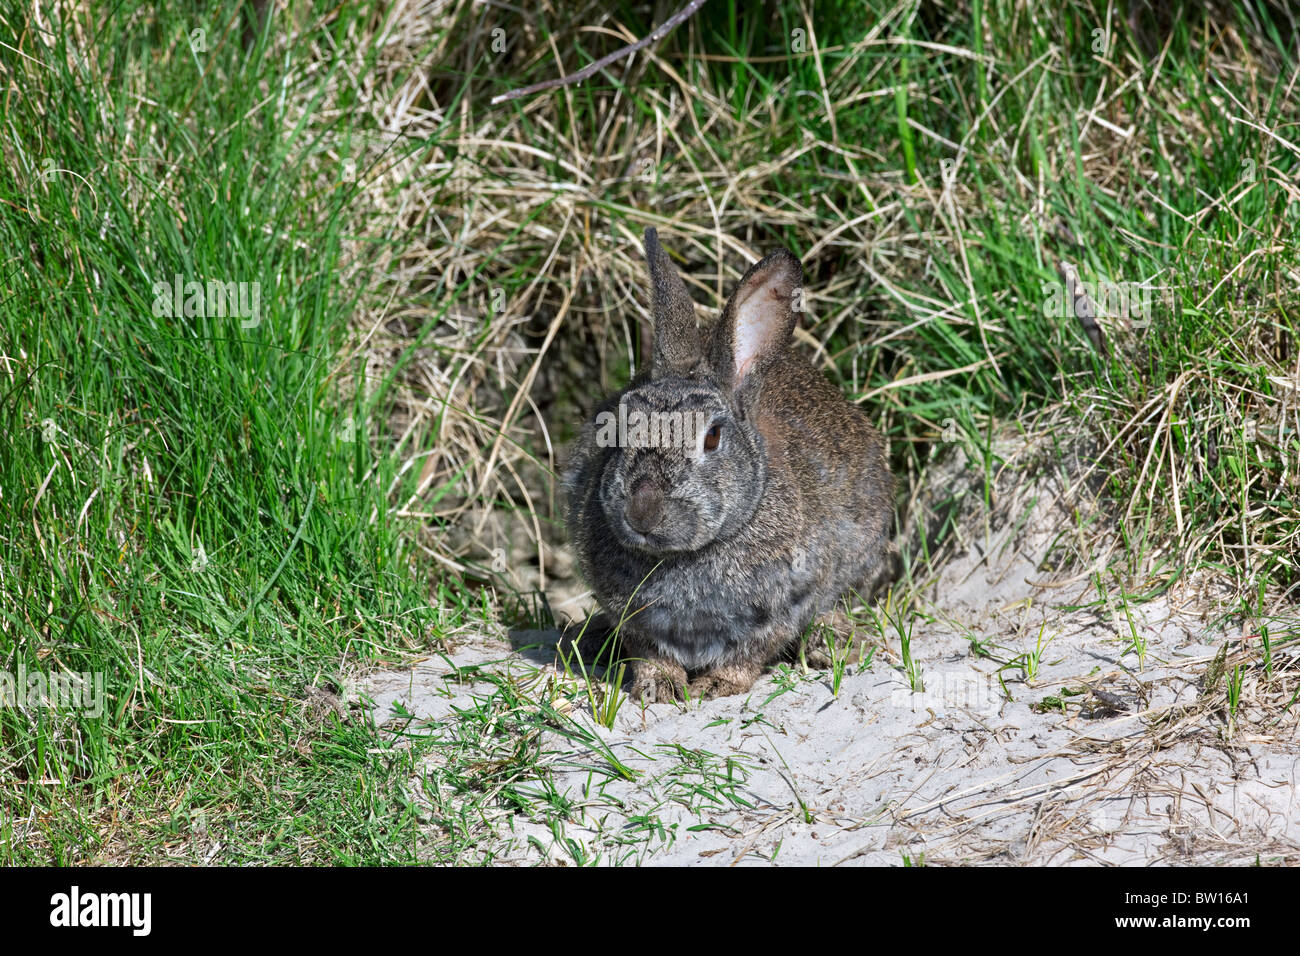 European rabbit (Oryctolagus cuniculus) in front of burrow entrance, Germany Stock Photo